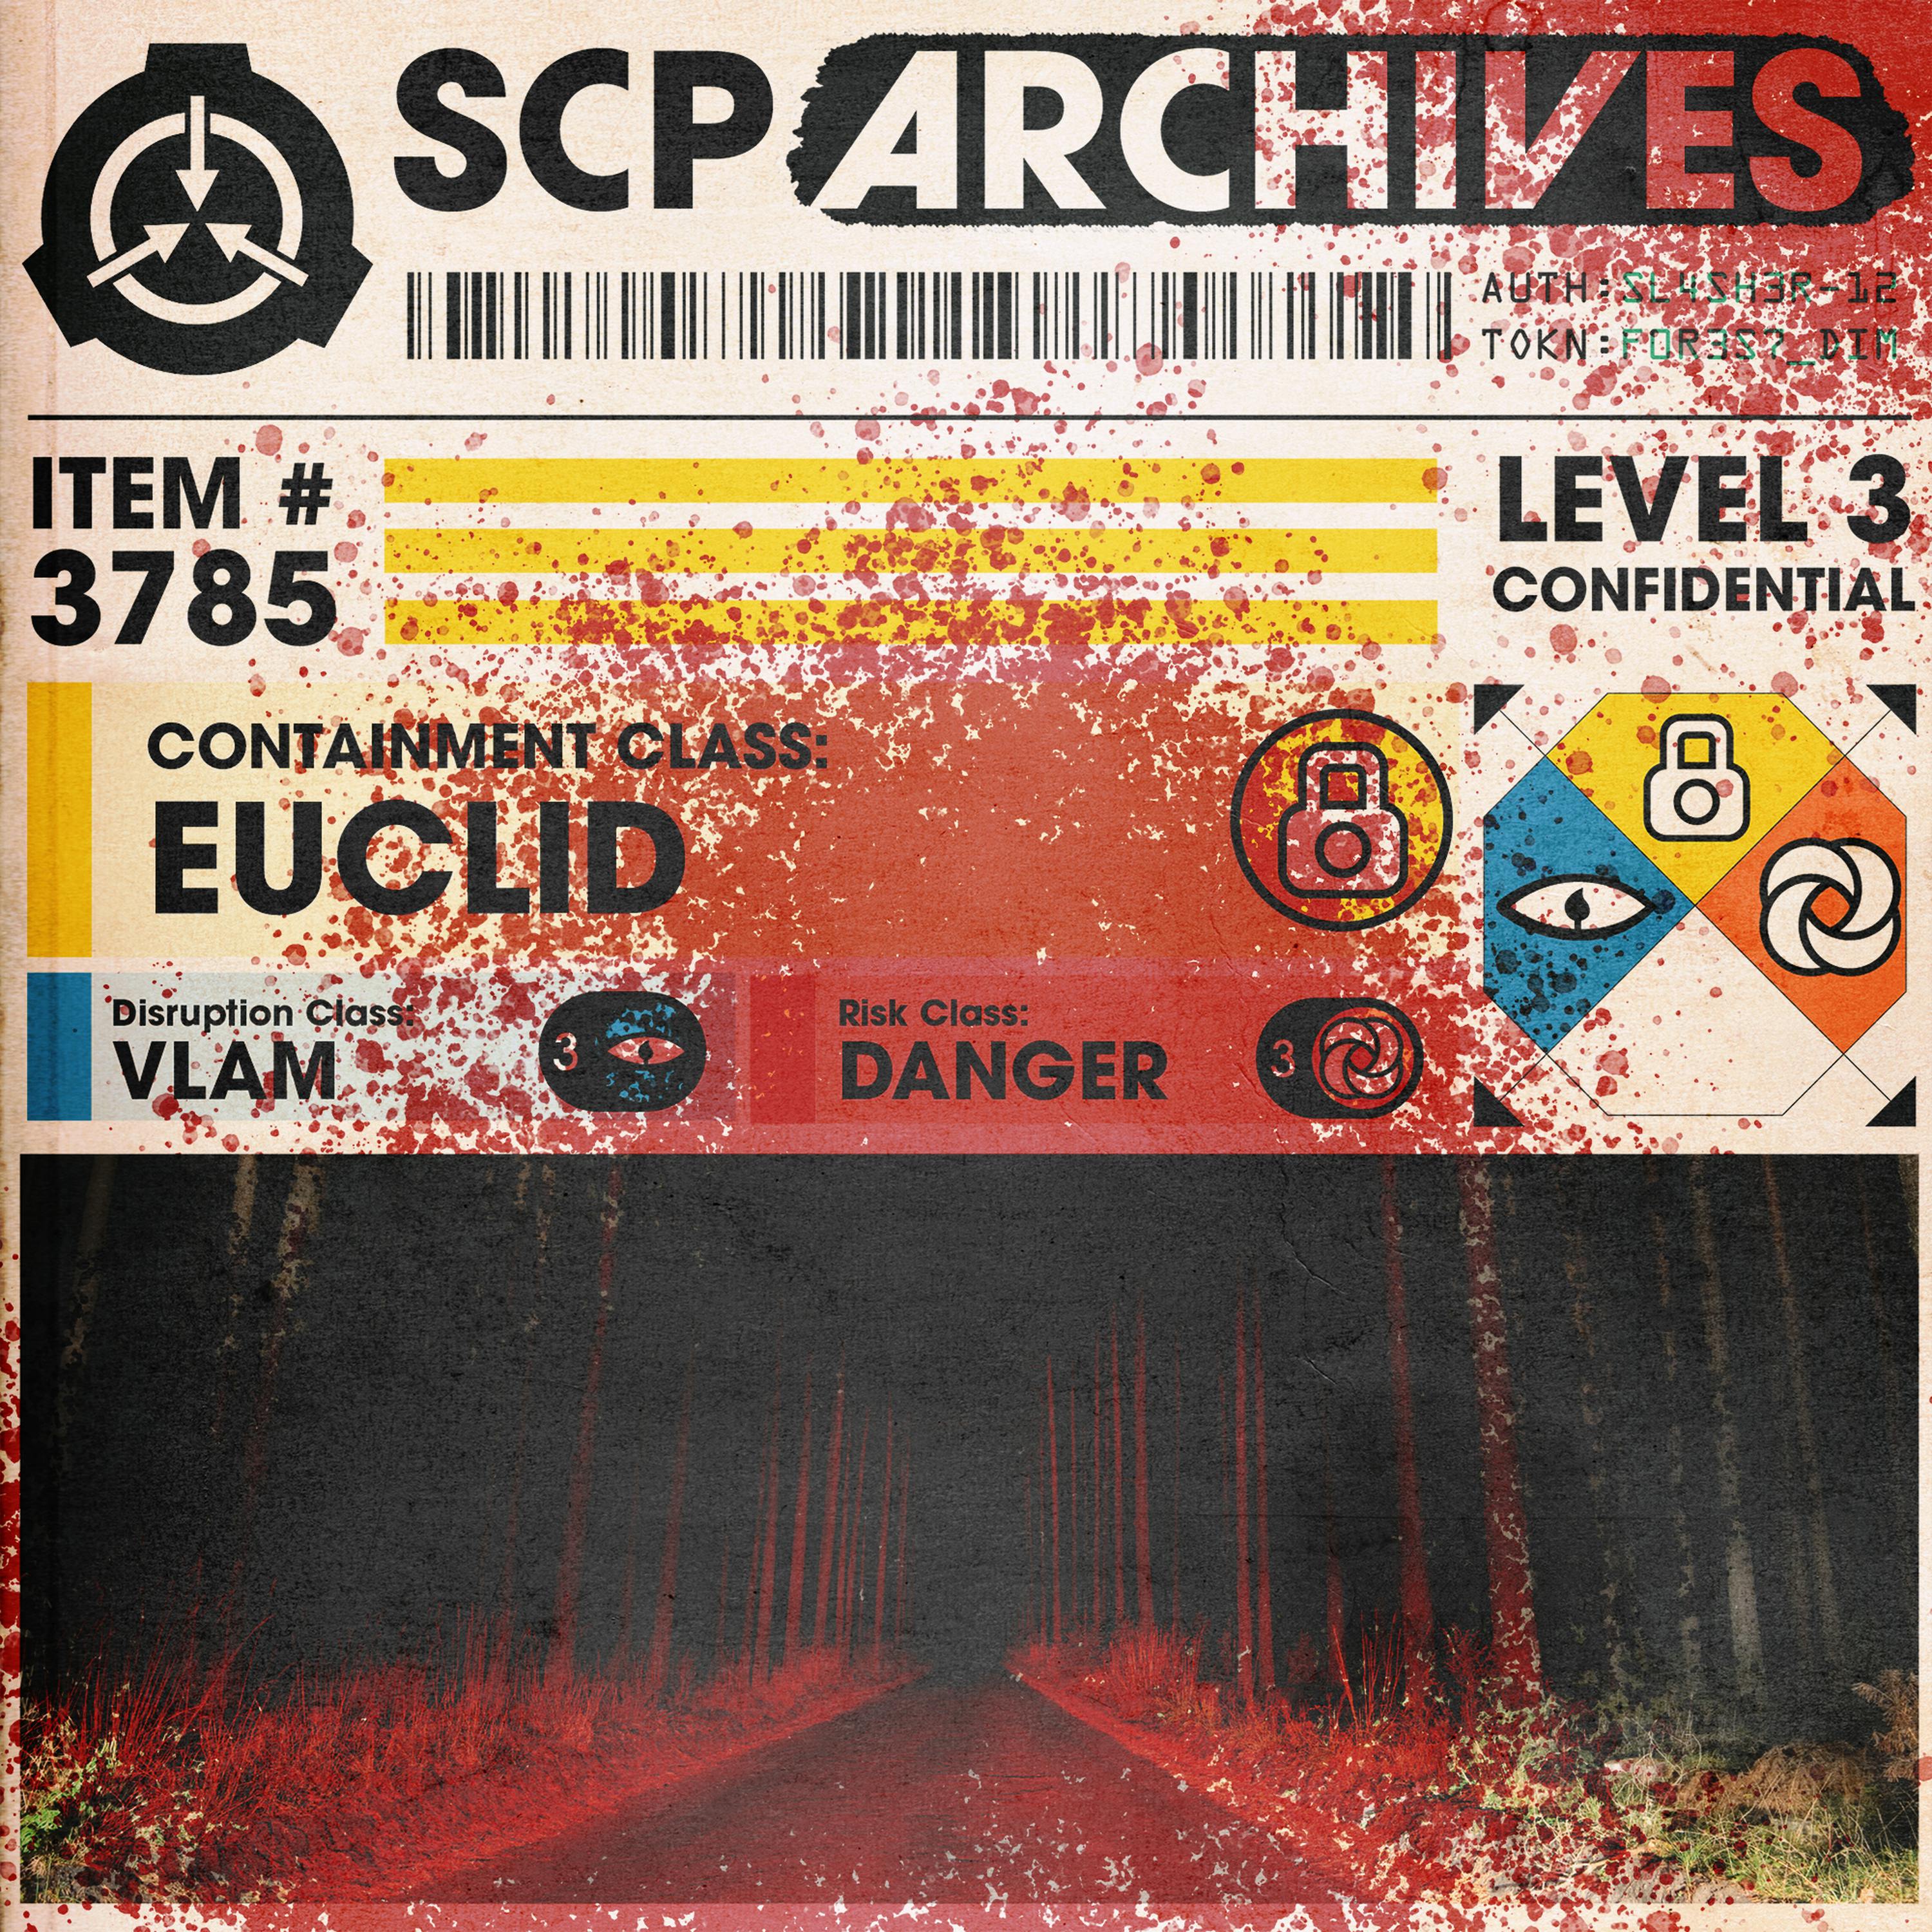 SCP Archives – Podcast – Podtail